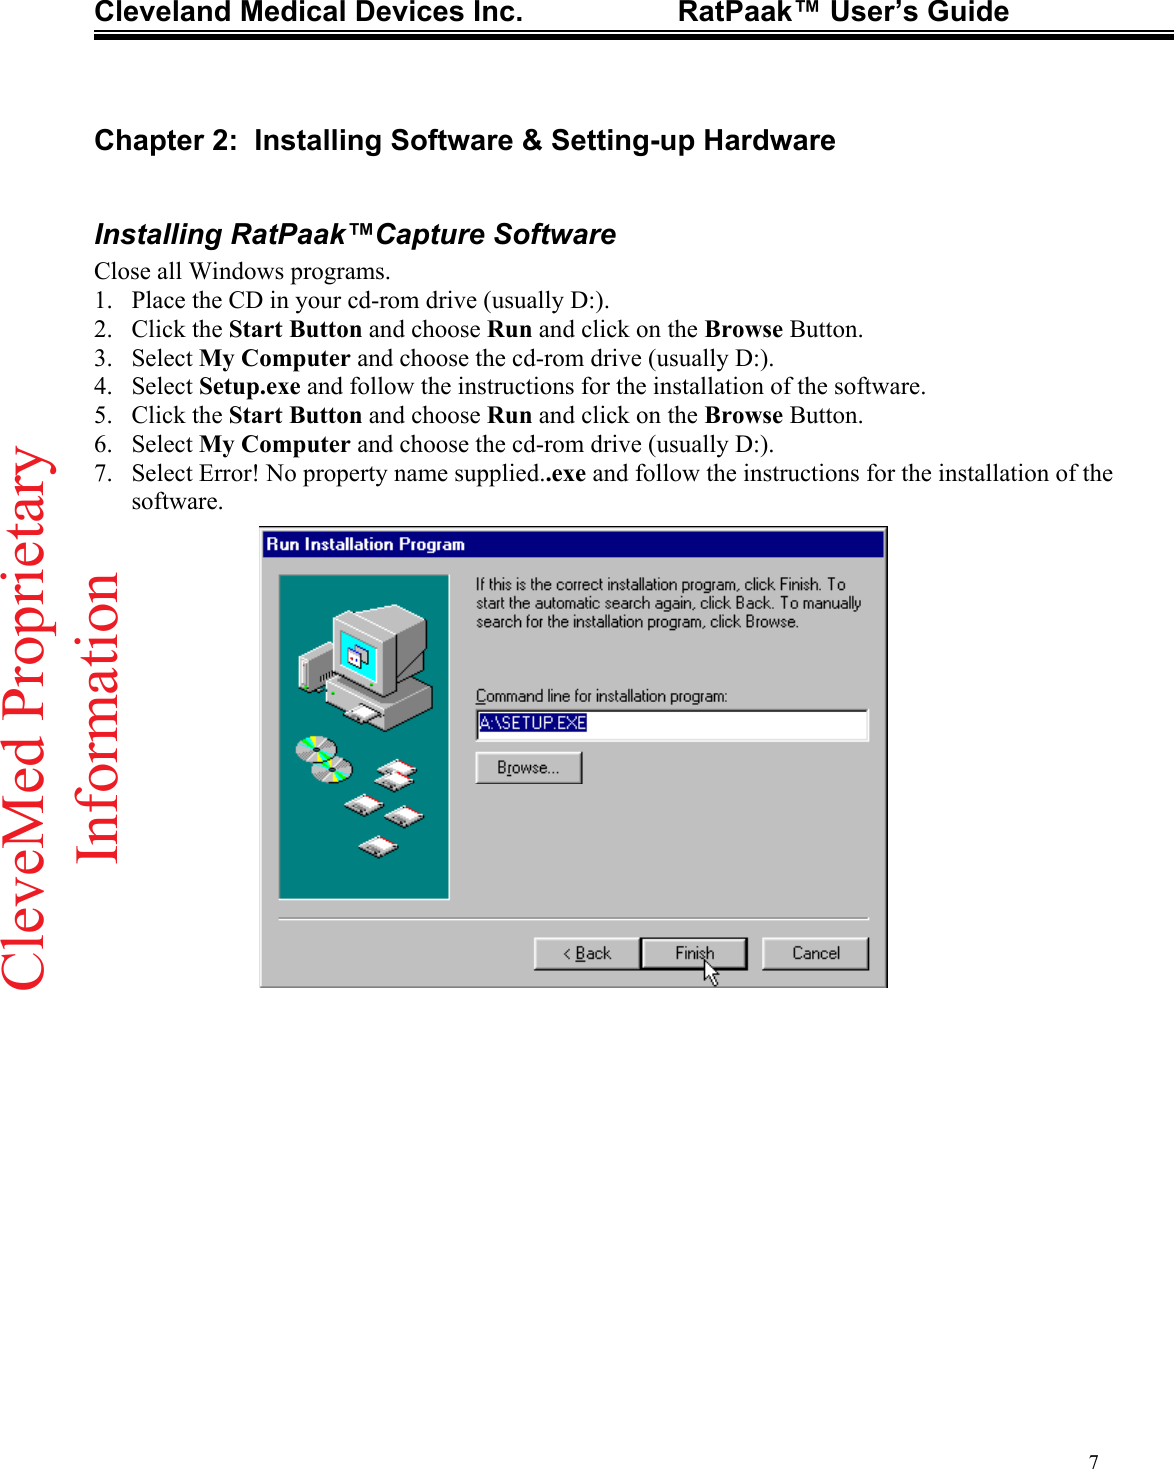 Cleveland Medical Devices Inc.                   RatPaak™ User’s Guide   Chapter 2:  Installing Software &amp; Setting-up Hardware  Installing RatPaak™Capture Software Close all Windows programs. 1.  Place the CD in your cd-rom drive (usually D:). 2. Click the Start Button and choose Run and click on the Browse Button. 3. Select My Computer and choose the cd-rom drive (usually D:). 4. Select Setup.exe and follow the instructions for the installation of the software. 5. Click the Start Button and choose Run and click on the Browse Button. 6. Select My Computer and choose the cd-rom drive (usually D:). 7.  Select Error! No property name supplied..exe and follow the instructions for the installation of the software.  7CleveMed ProprietaryInformation